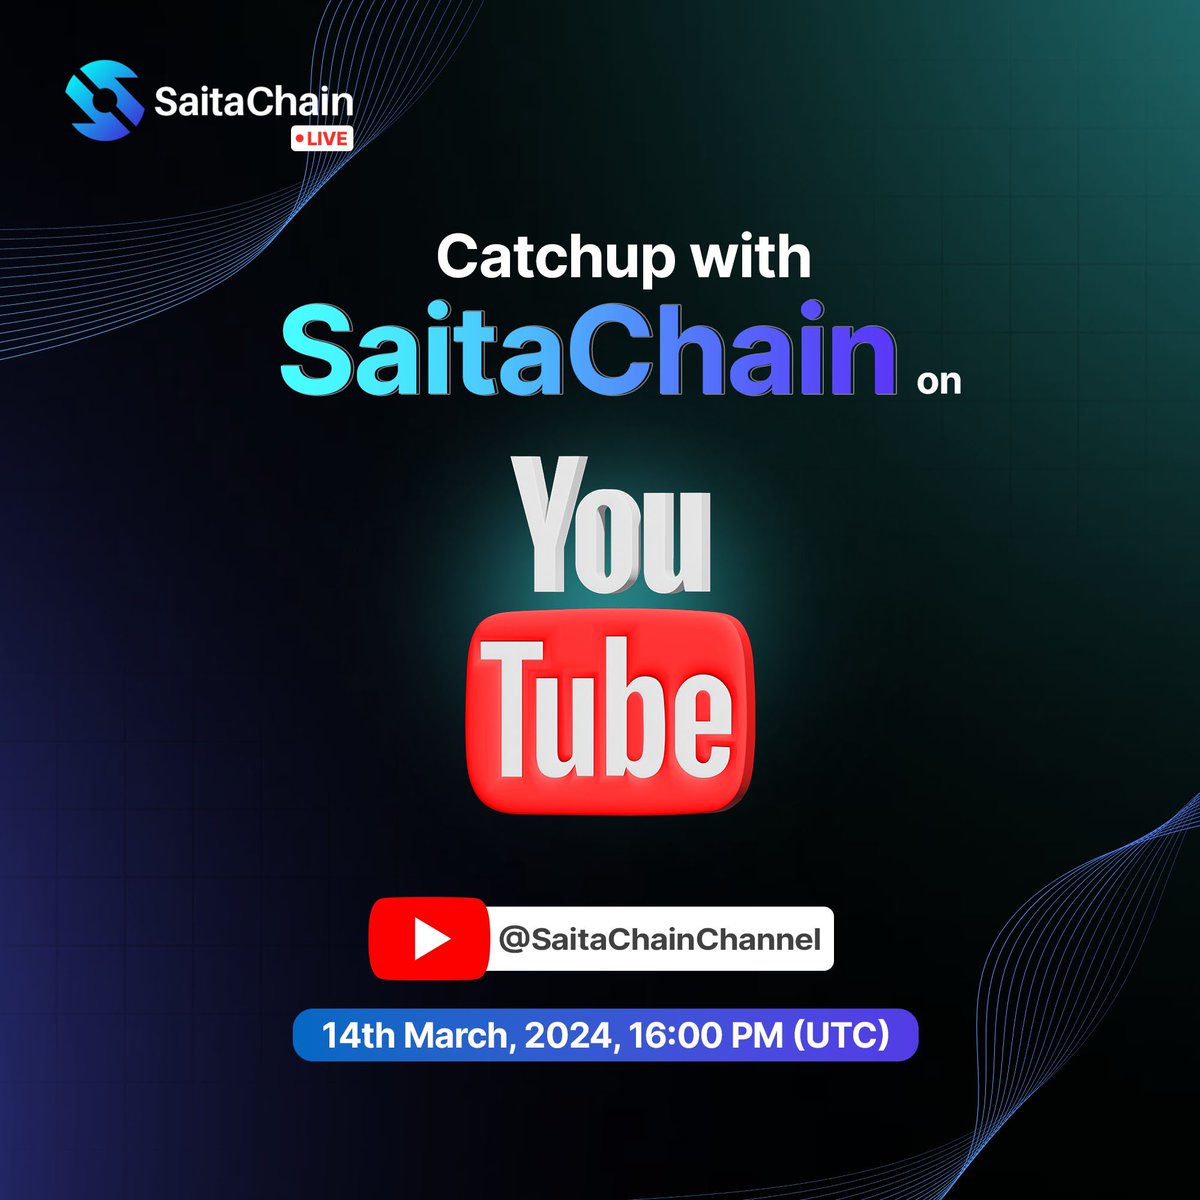 Hello SaitaChain fam! 👋🏼 Here’s a great opportunity for us to connect and catchup! 🤝🏼 Join us tomorrow for an interesting live session at 4 PM UTC on our YouTube channel. 🎙️ Click on the link below to tune in! 👇🏼 youtube.com/live/2C9ZMaFC8… #SaitaChain #SaitaChainCoin #Live…